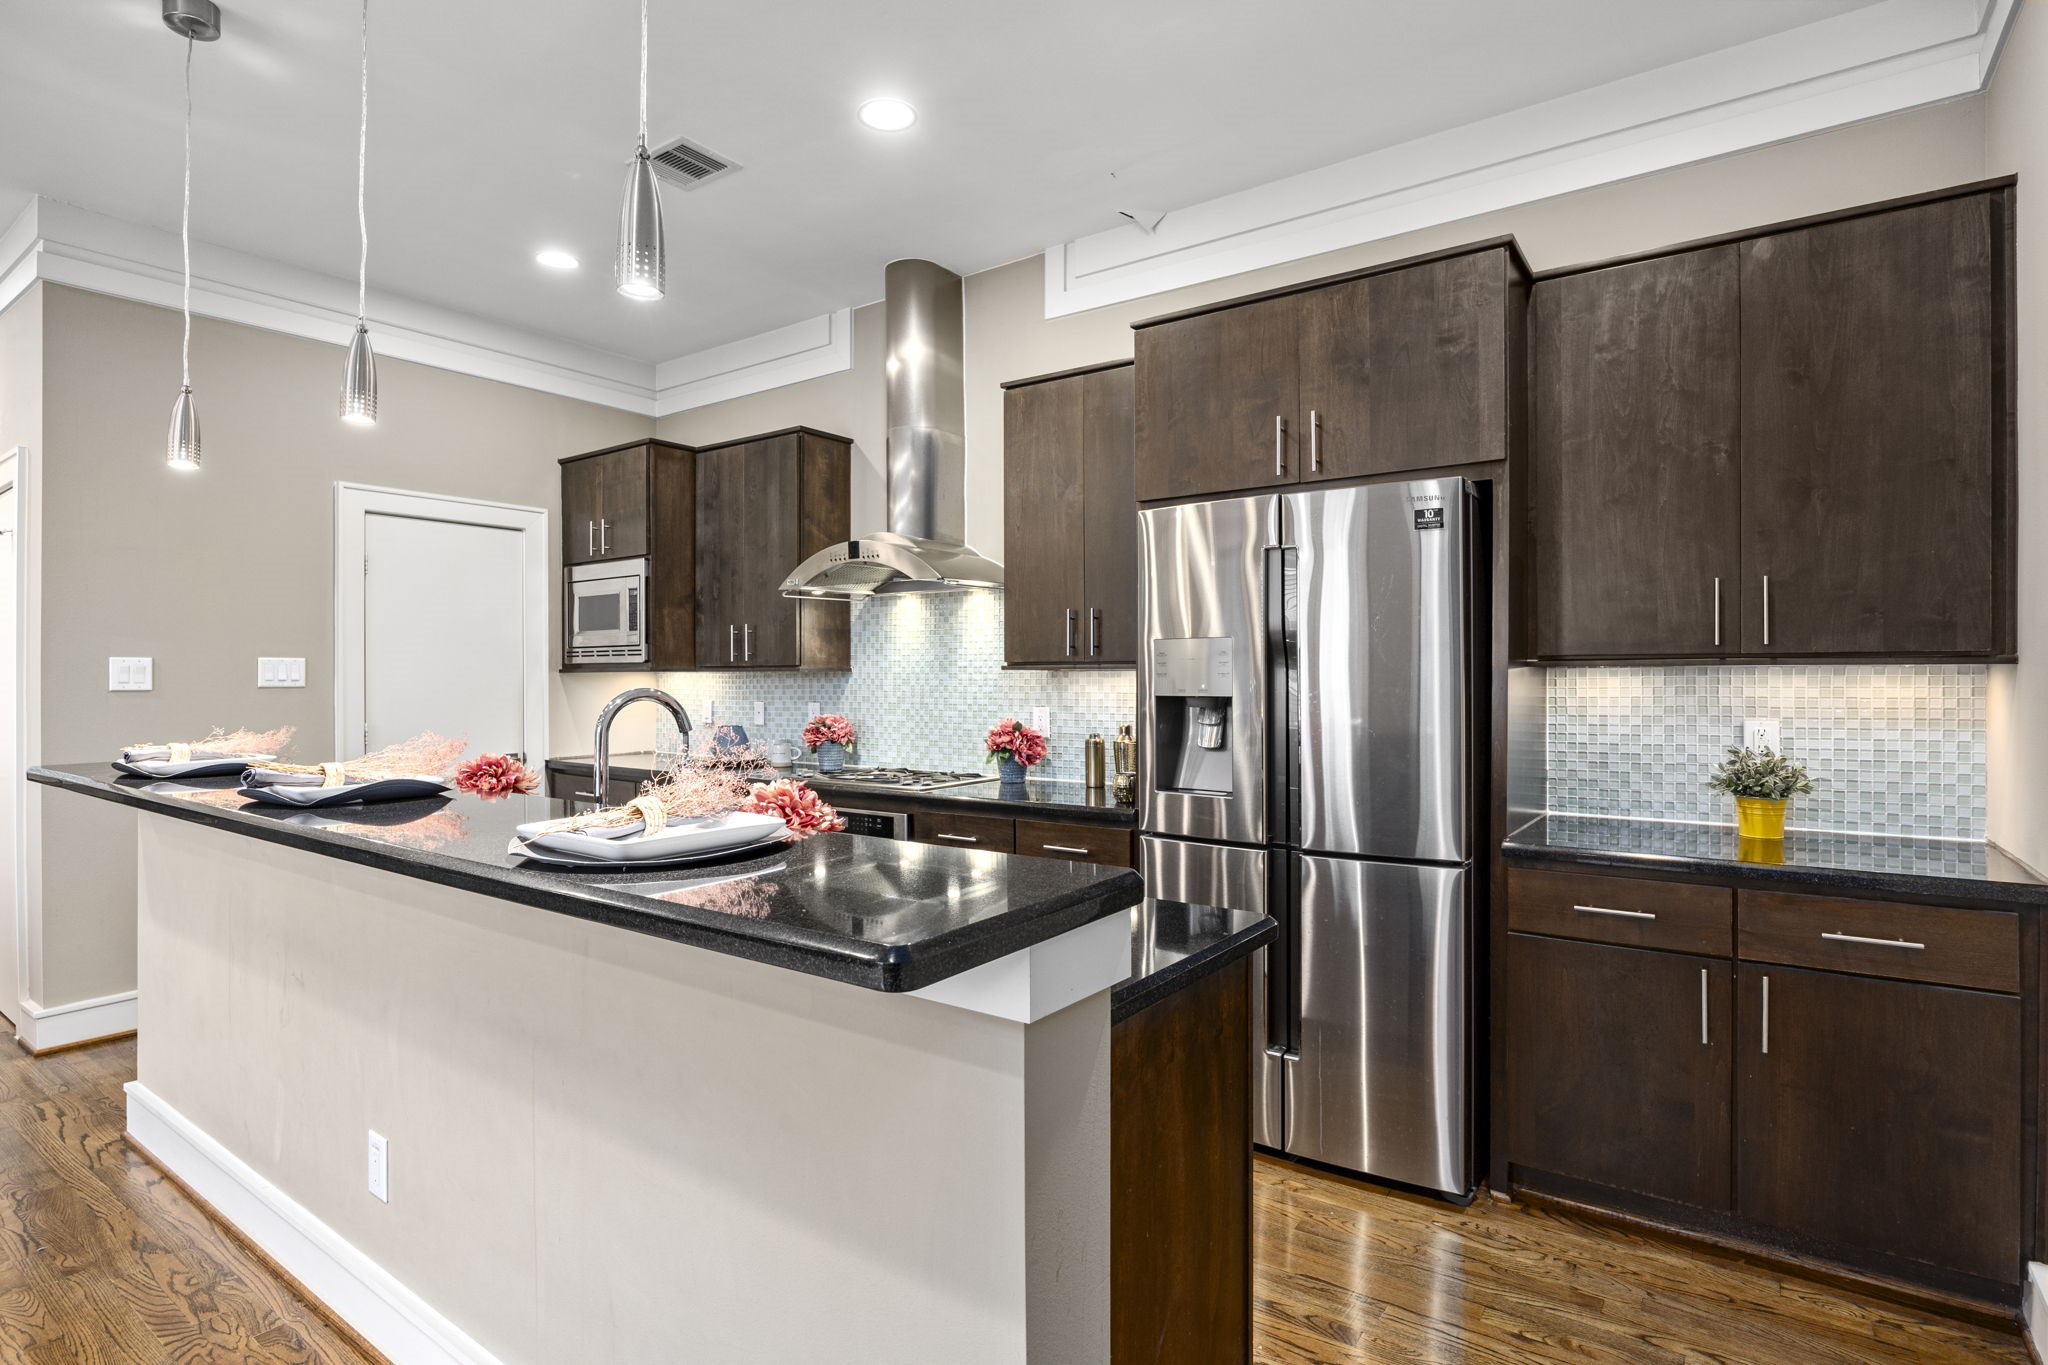 Your family & friends can join you while seated at the breakfast bar as you prepare delicious entrees. The stainless steel appliances complete the kitchen to perfection!! 322 Patterson St., Houston, TX  77007